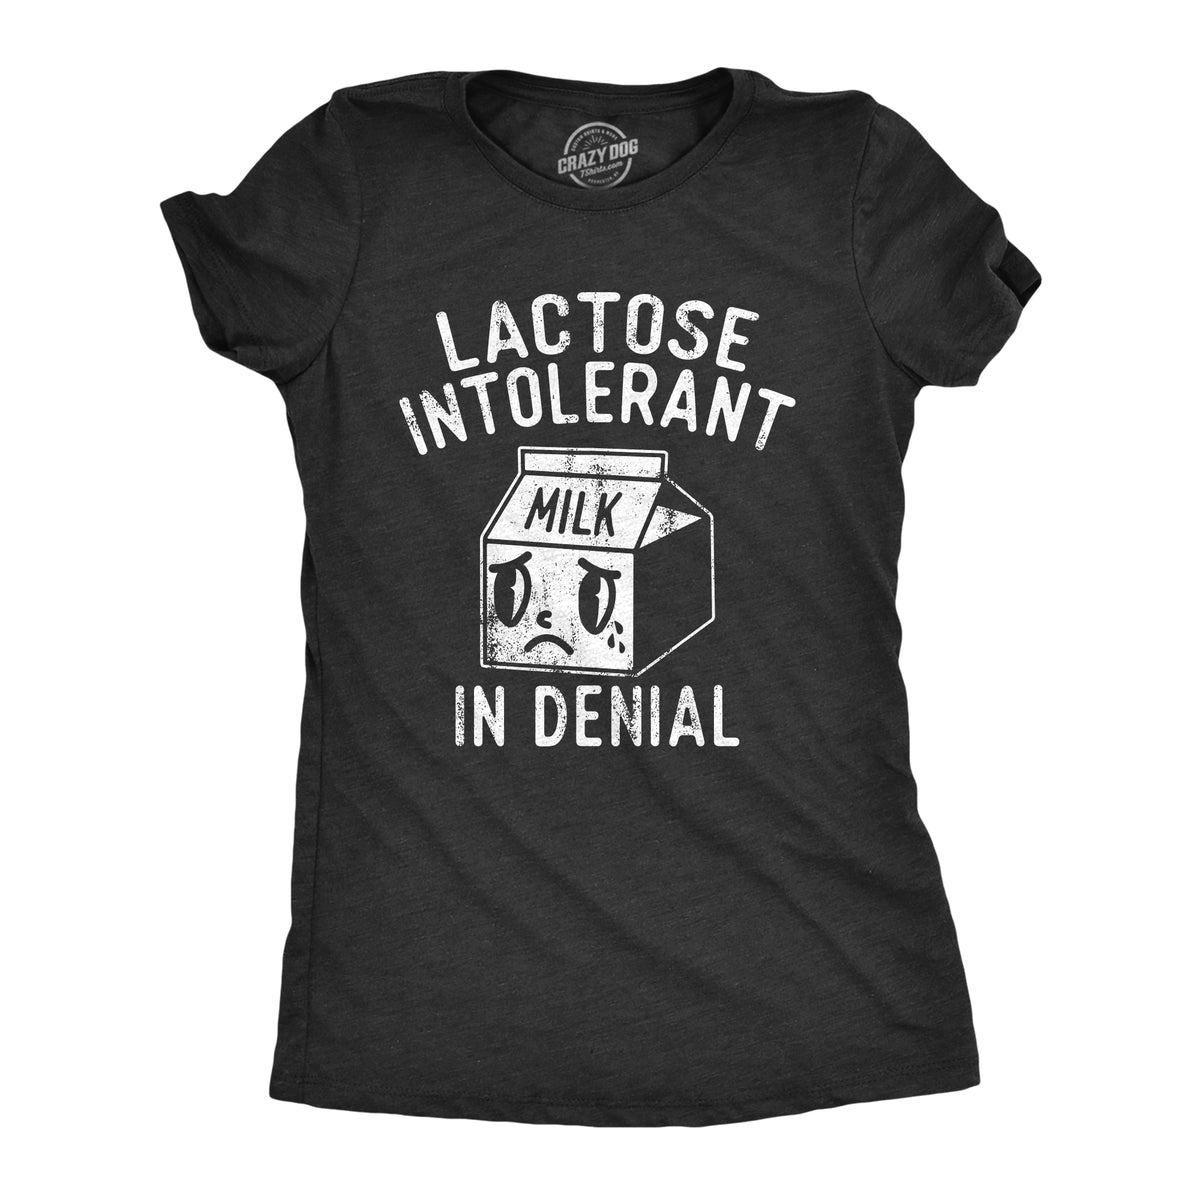 Funny Heather Black - LACTOSE Lactose Intolerant In Denial Womens T Shirt Nerdy Food sarcastic Tee